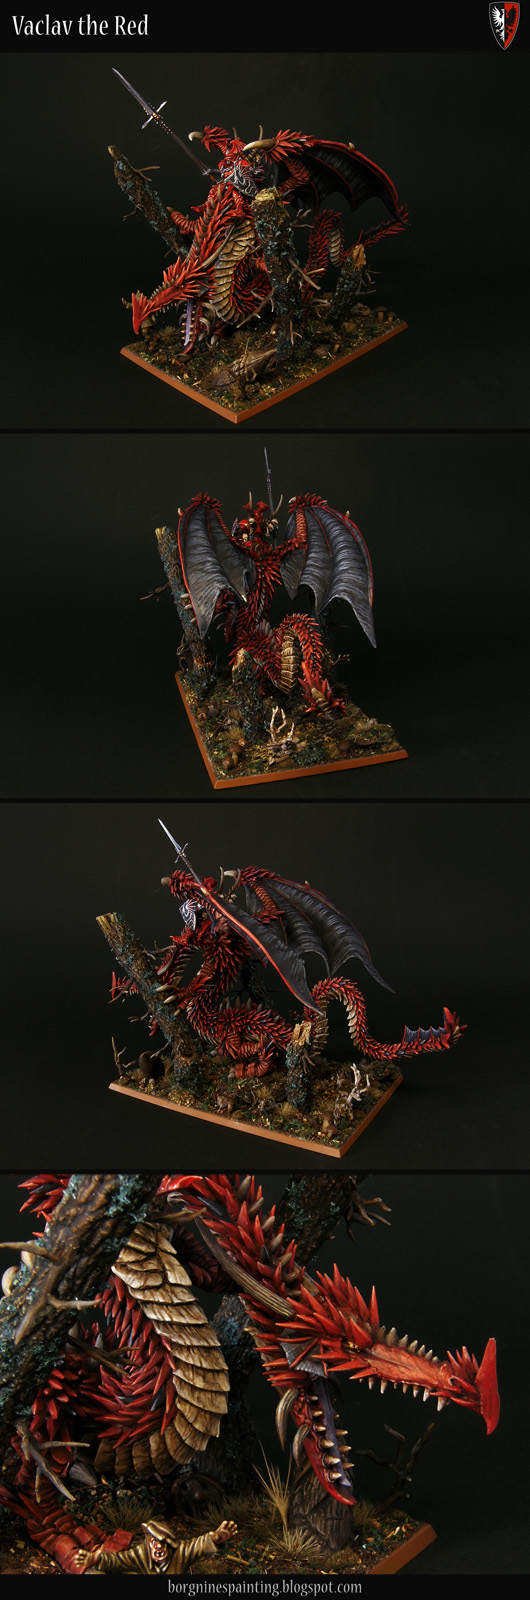 A Vampire Lord miniature riding a heavily converted High Elf Dragon, one from Imrik. The dragon is covered in pointy scales, made out of greenstuff painted red and is going through a forest, felling down trees. The whole diorama-like composition is visible from several angles and usable in WFB or AoS. The last picture shows a close-up on the dragon's face.